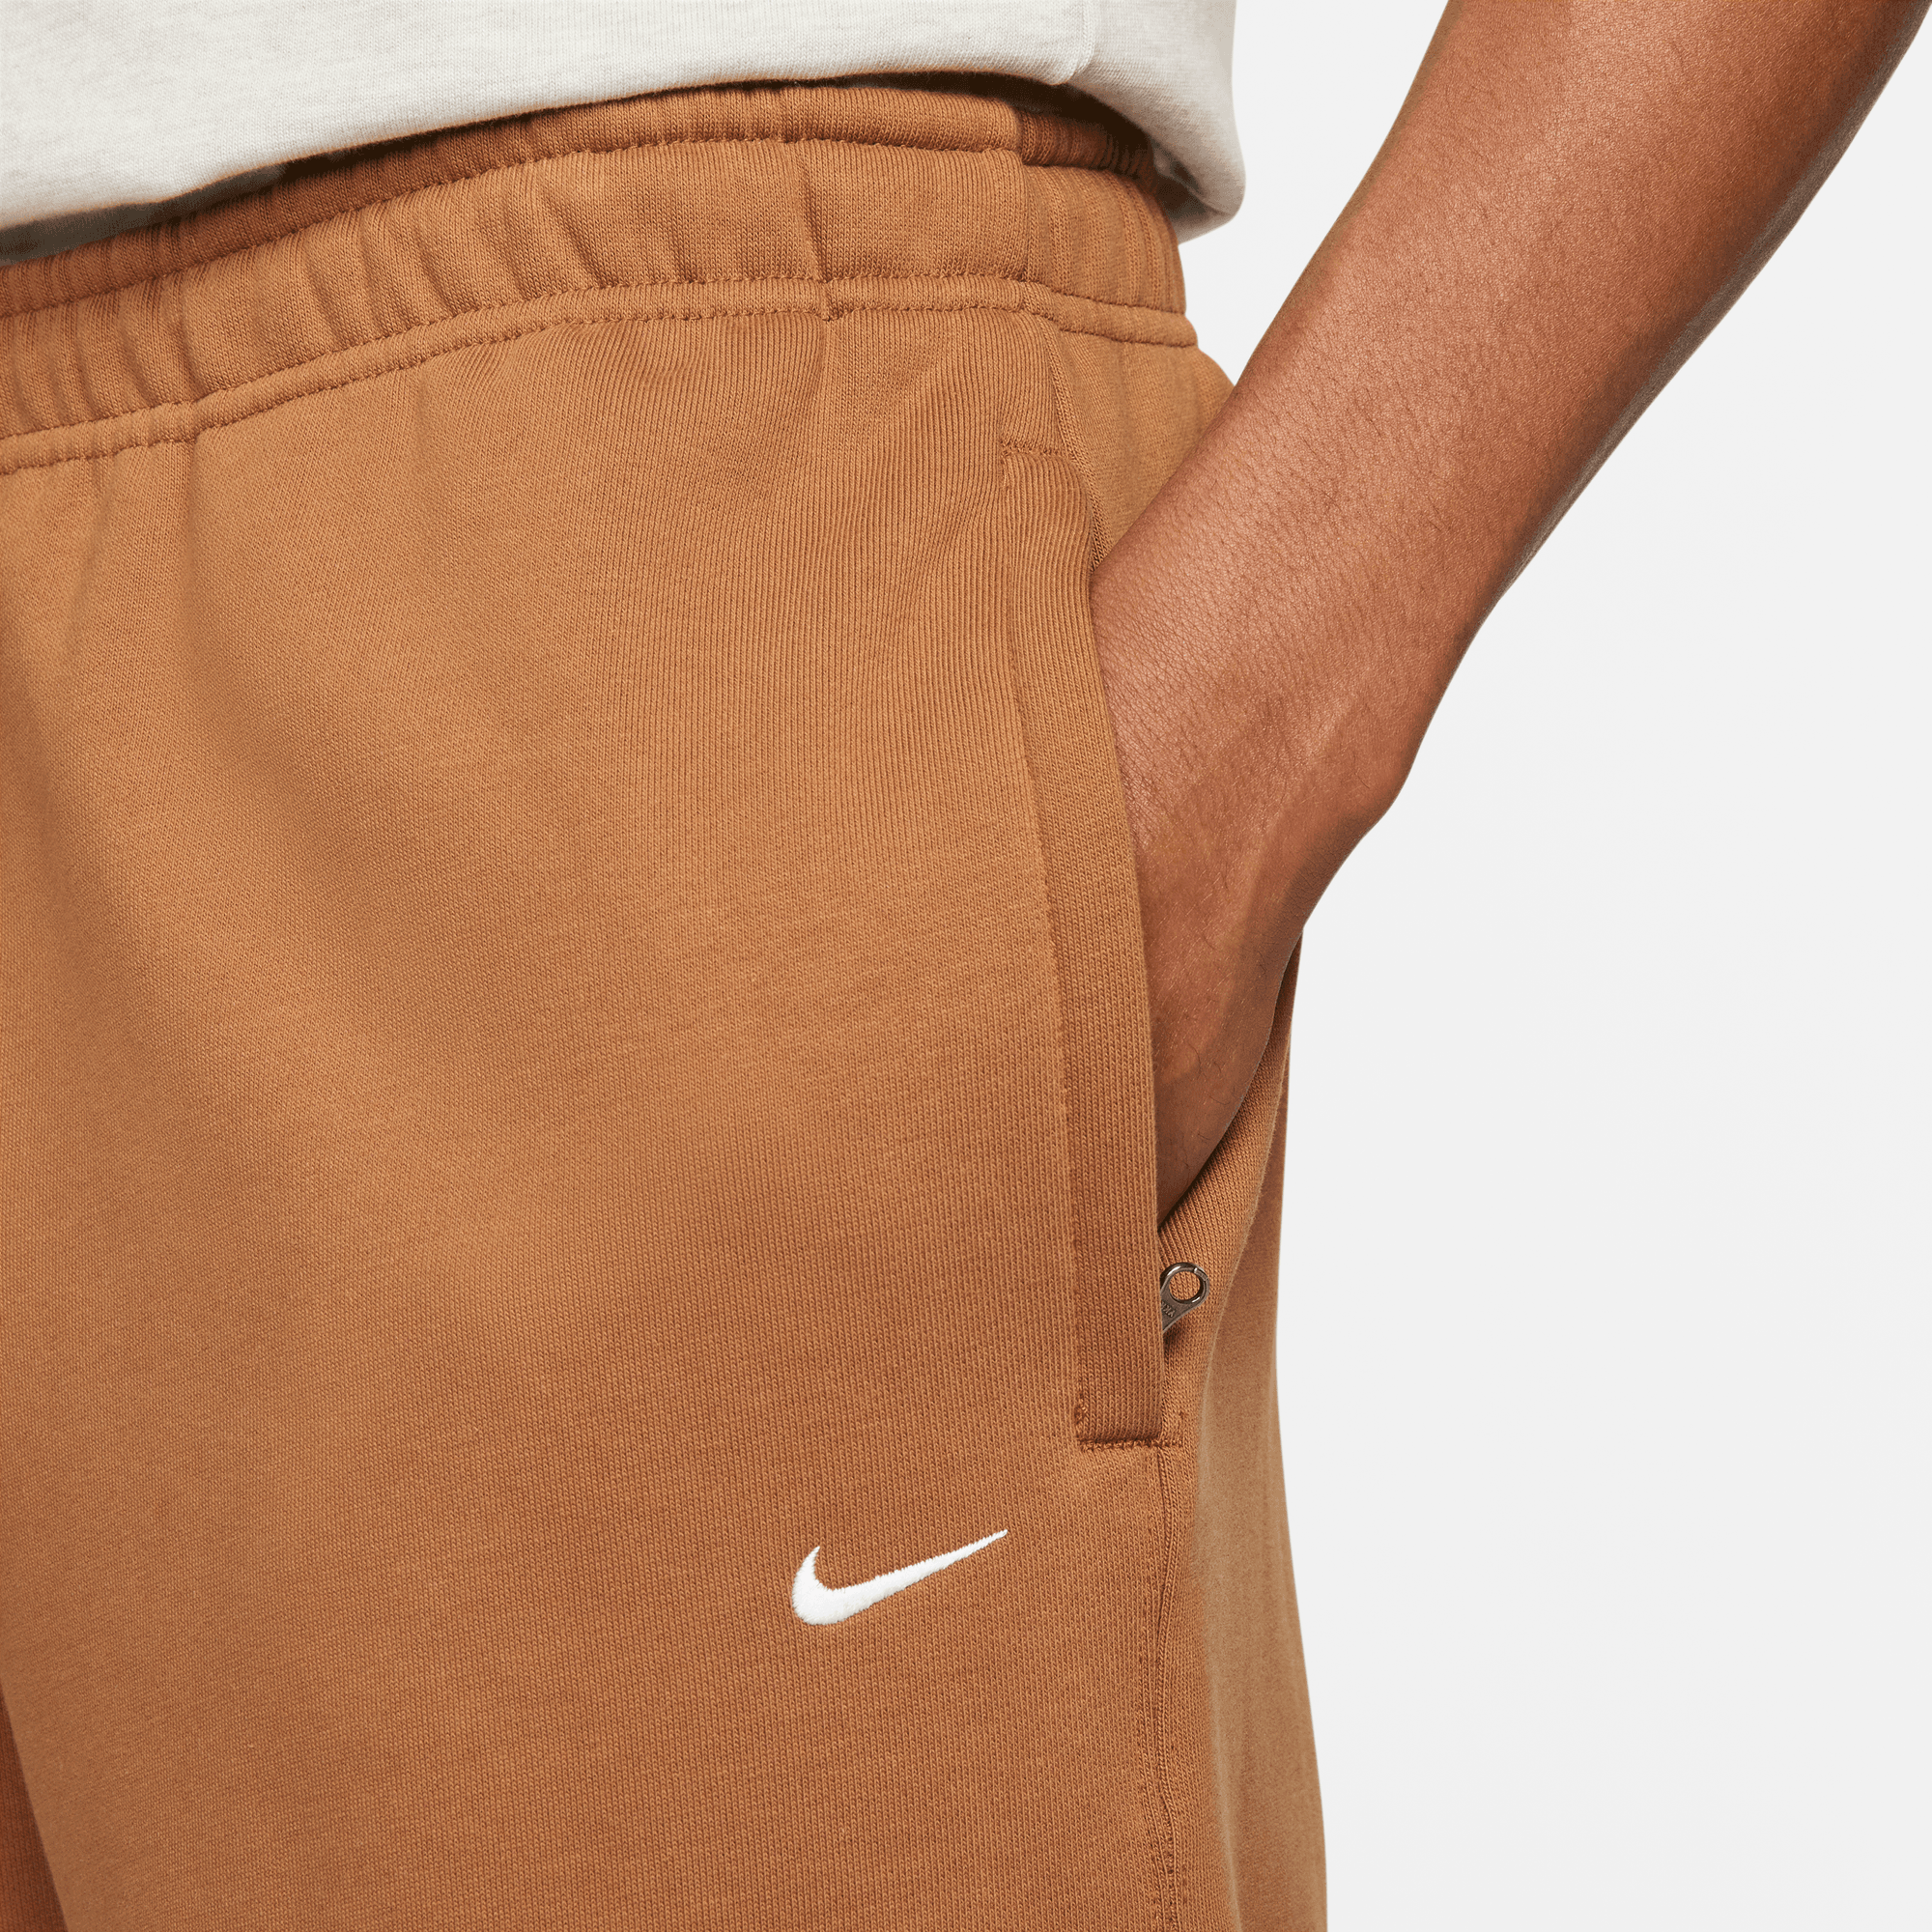 Soloswoosh Pant - Ale Brown/White